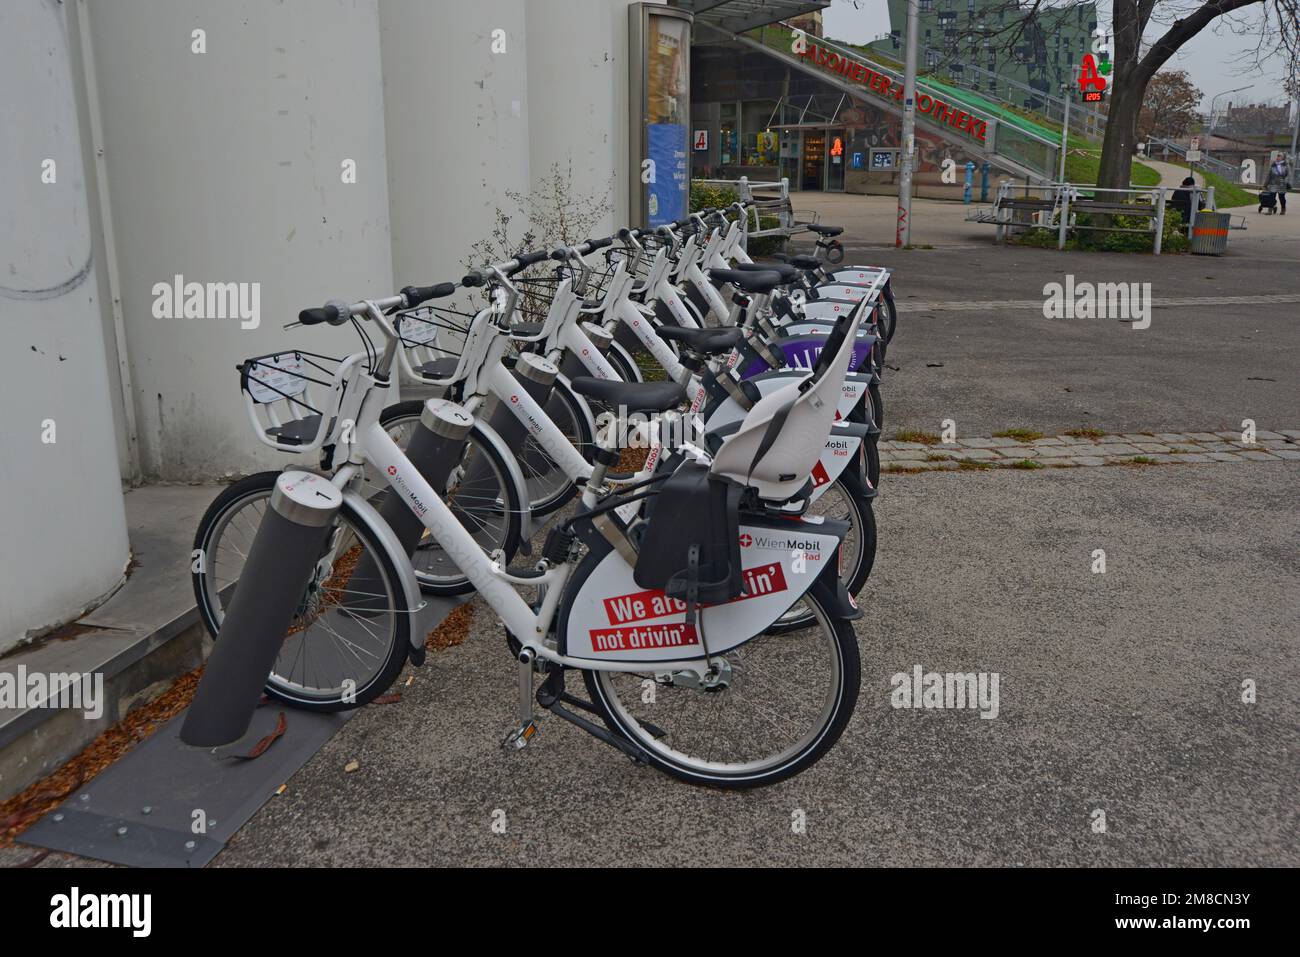 WienMobil bicycle rental docking stations in Vienna, Austria, The bike hire scheme operates 3000 cycles at fixed and digital docking stations Stock Photo